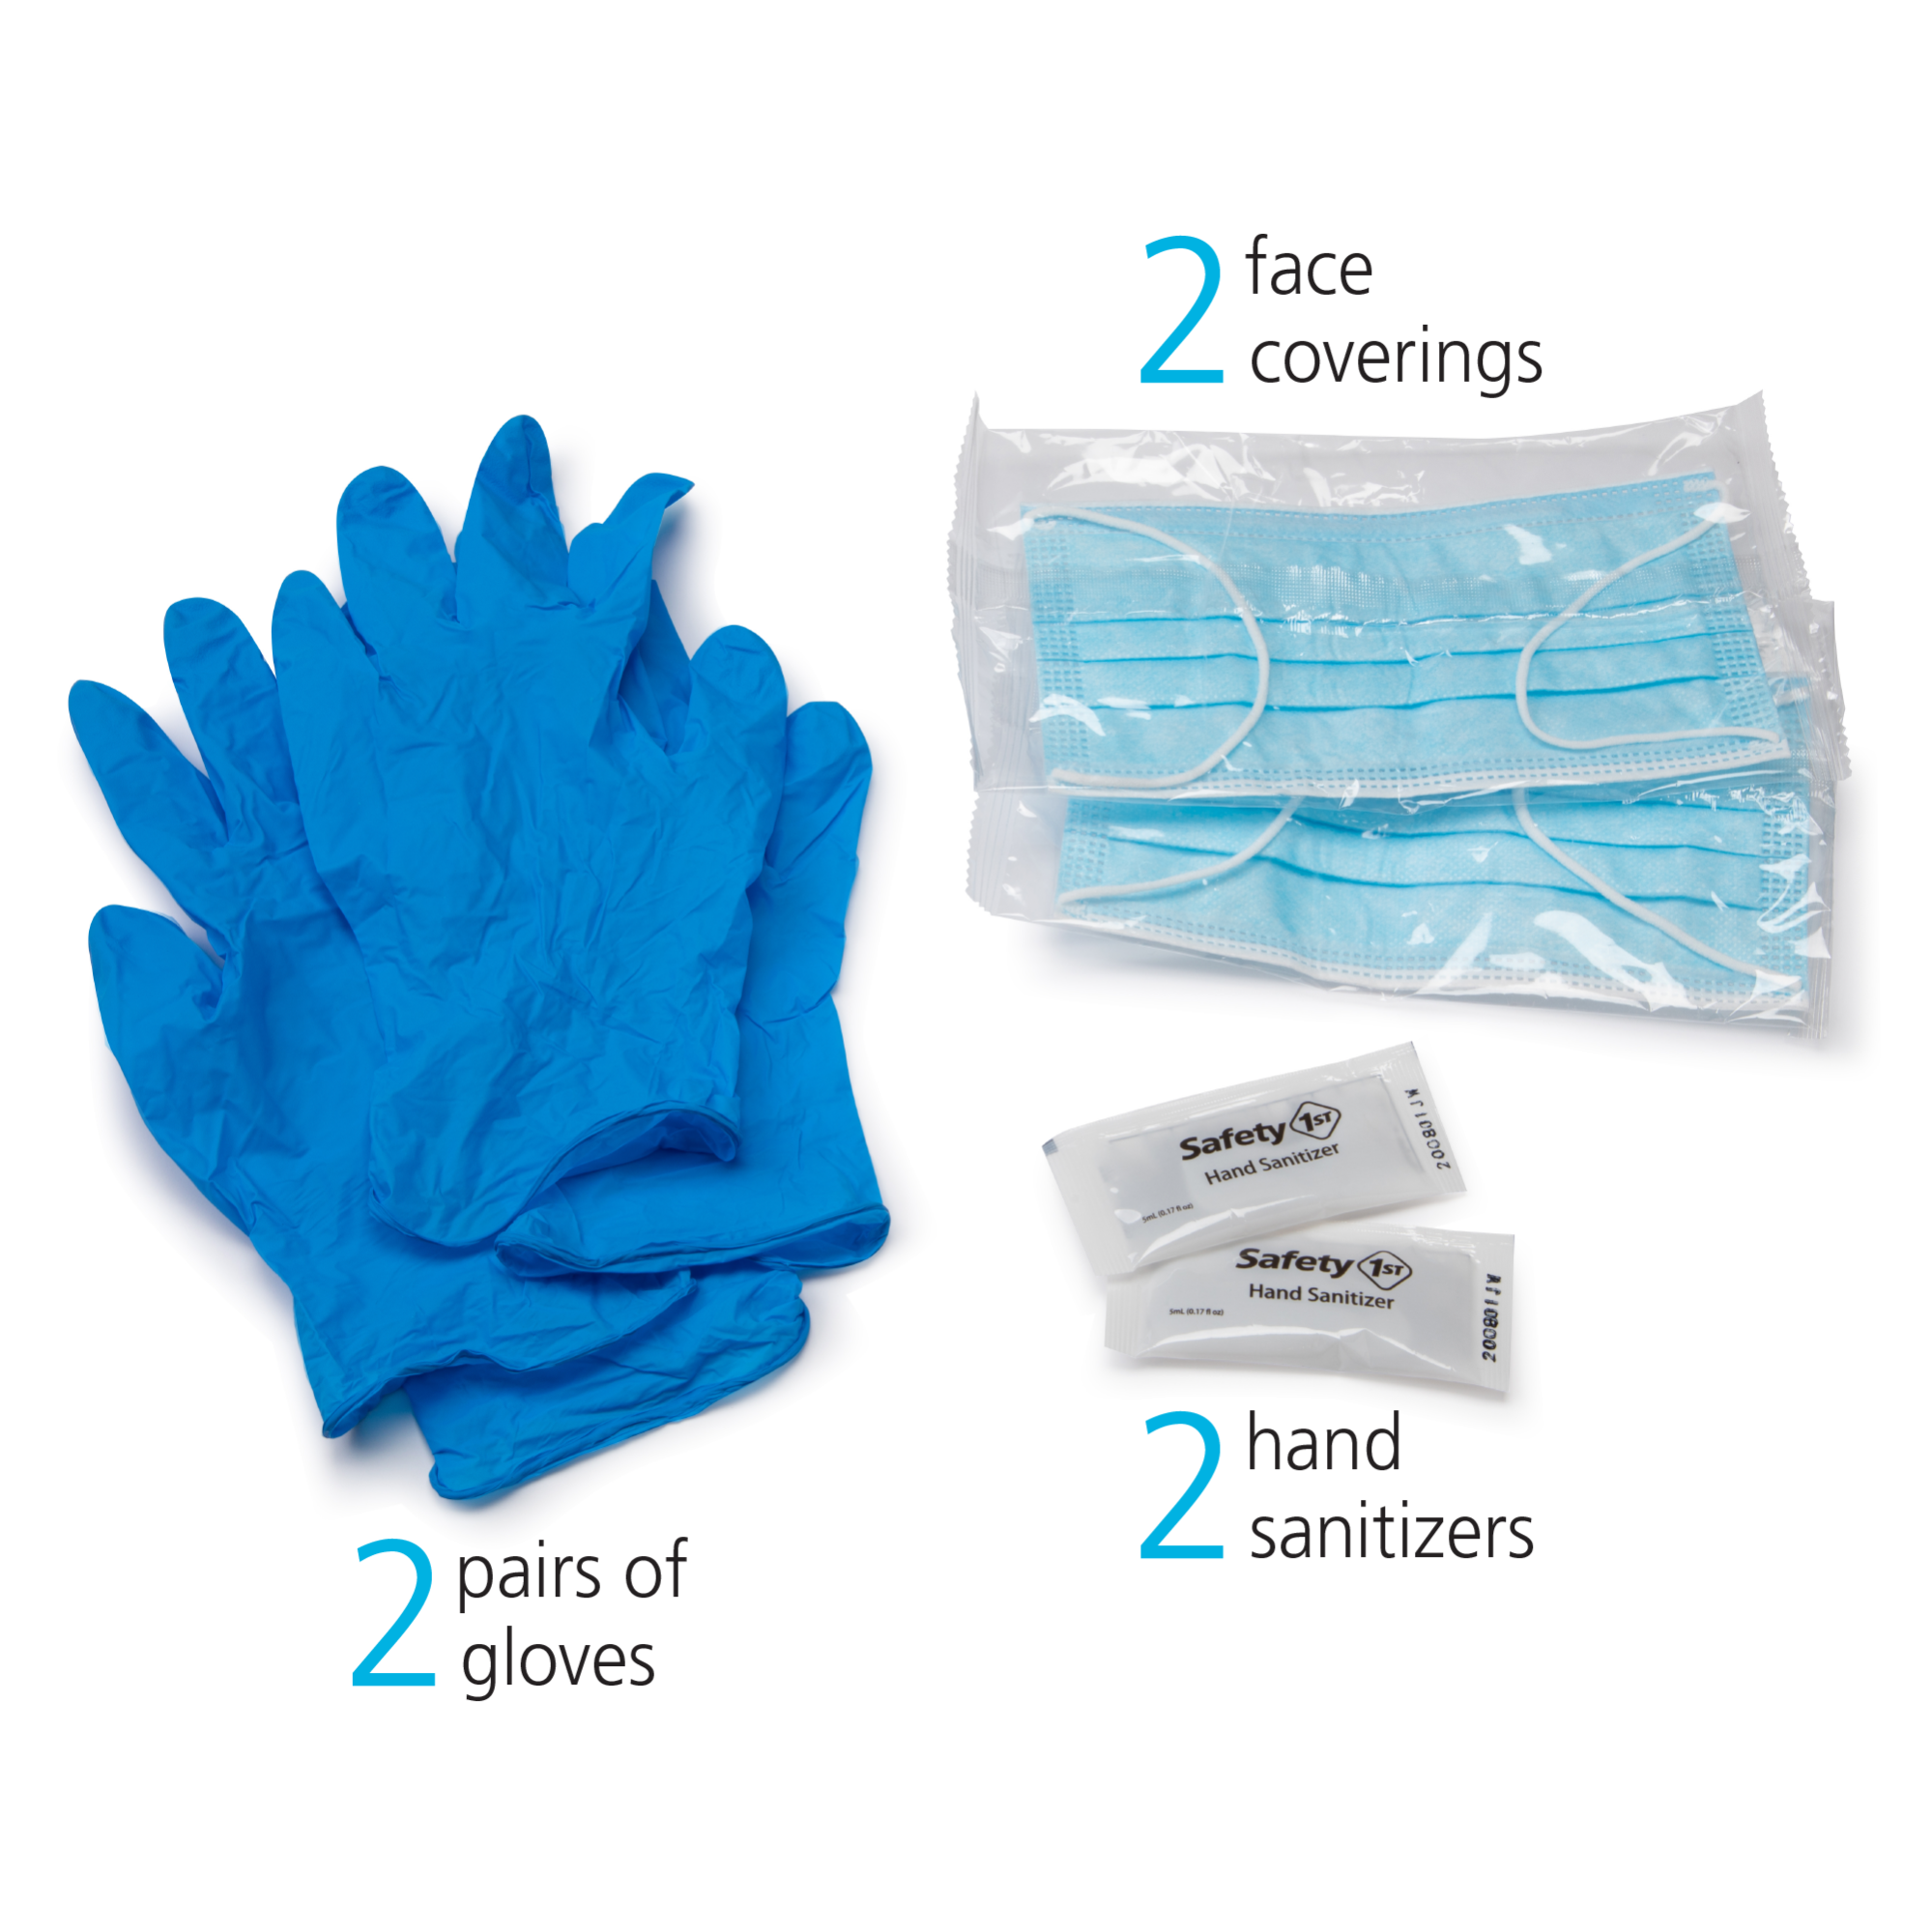 2 Pairs of gloves, 2 hand sanitizers and 2 face coverings